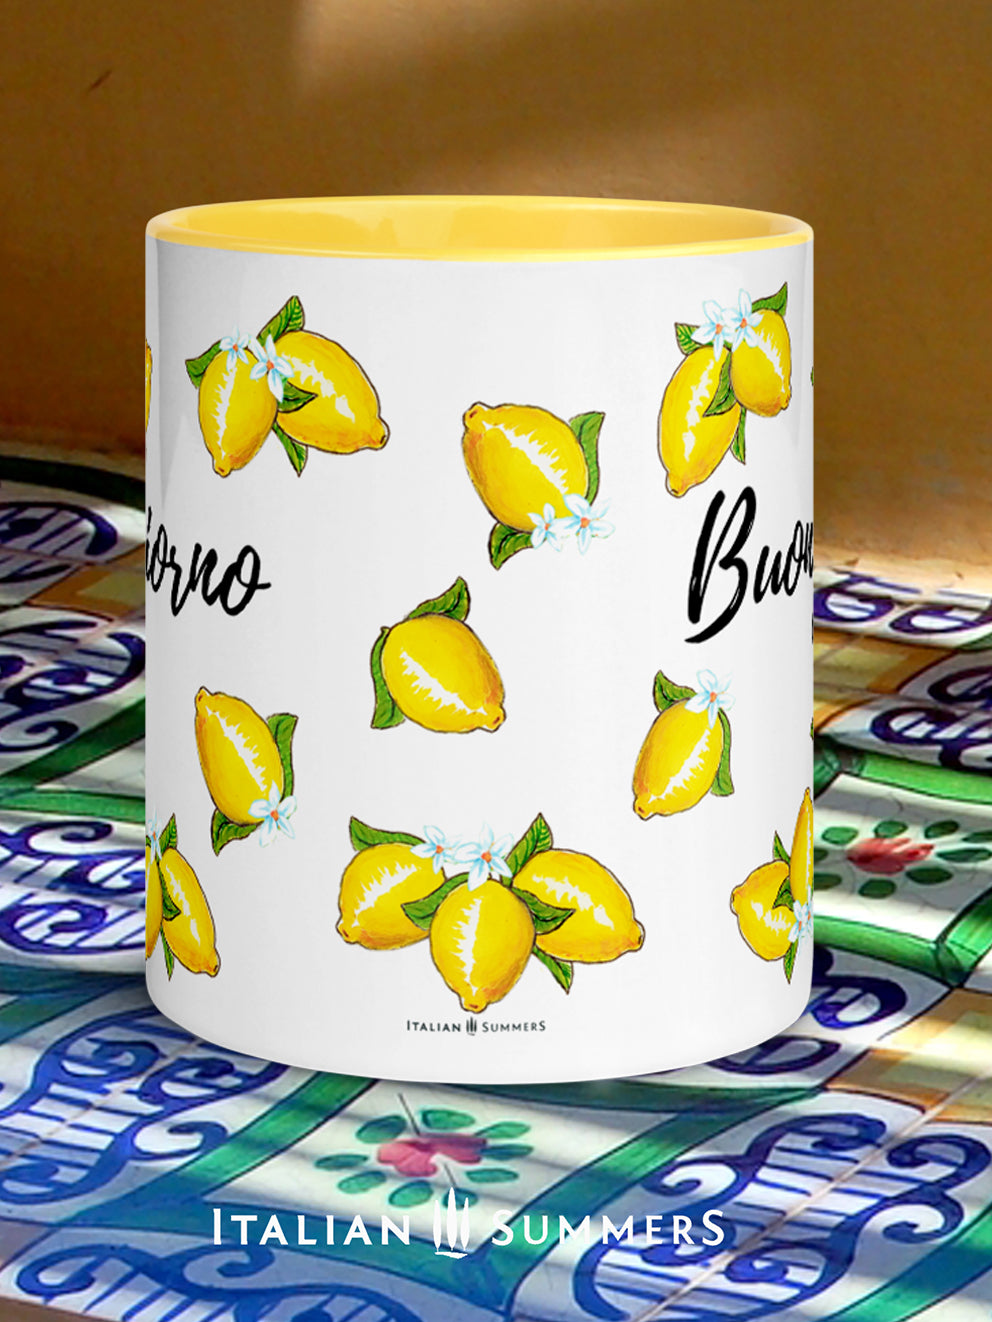 Italy inspired coffee mug with happy sketched lemons over the whole mug on all sidesand a playful Buongiorno writing beteen the lemons. The inside and handle of the mug are yellow. On the lemons are little lemon flowers. Made by Italian Summers